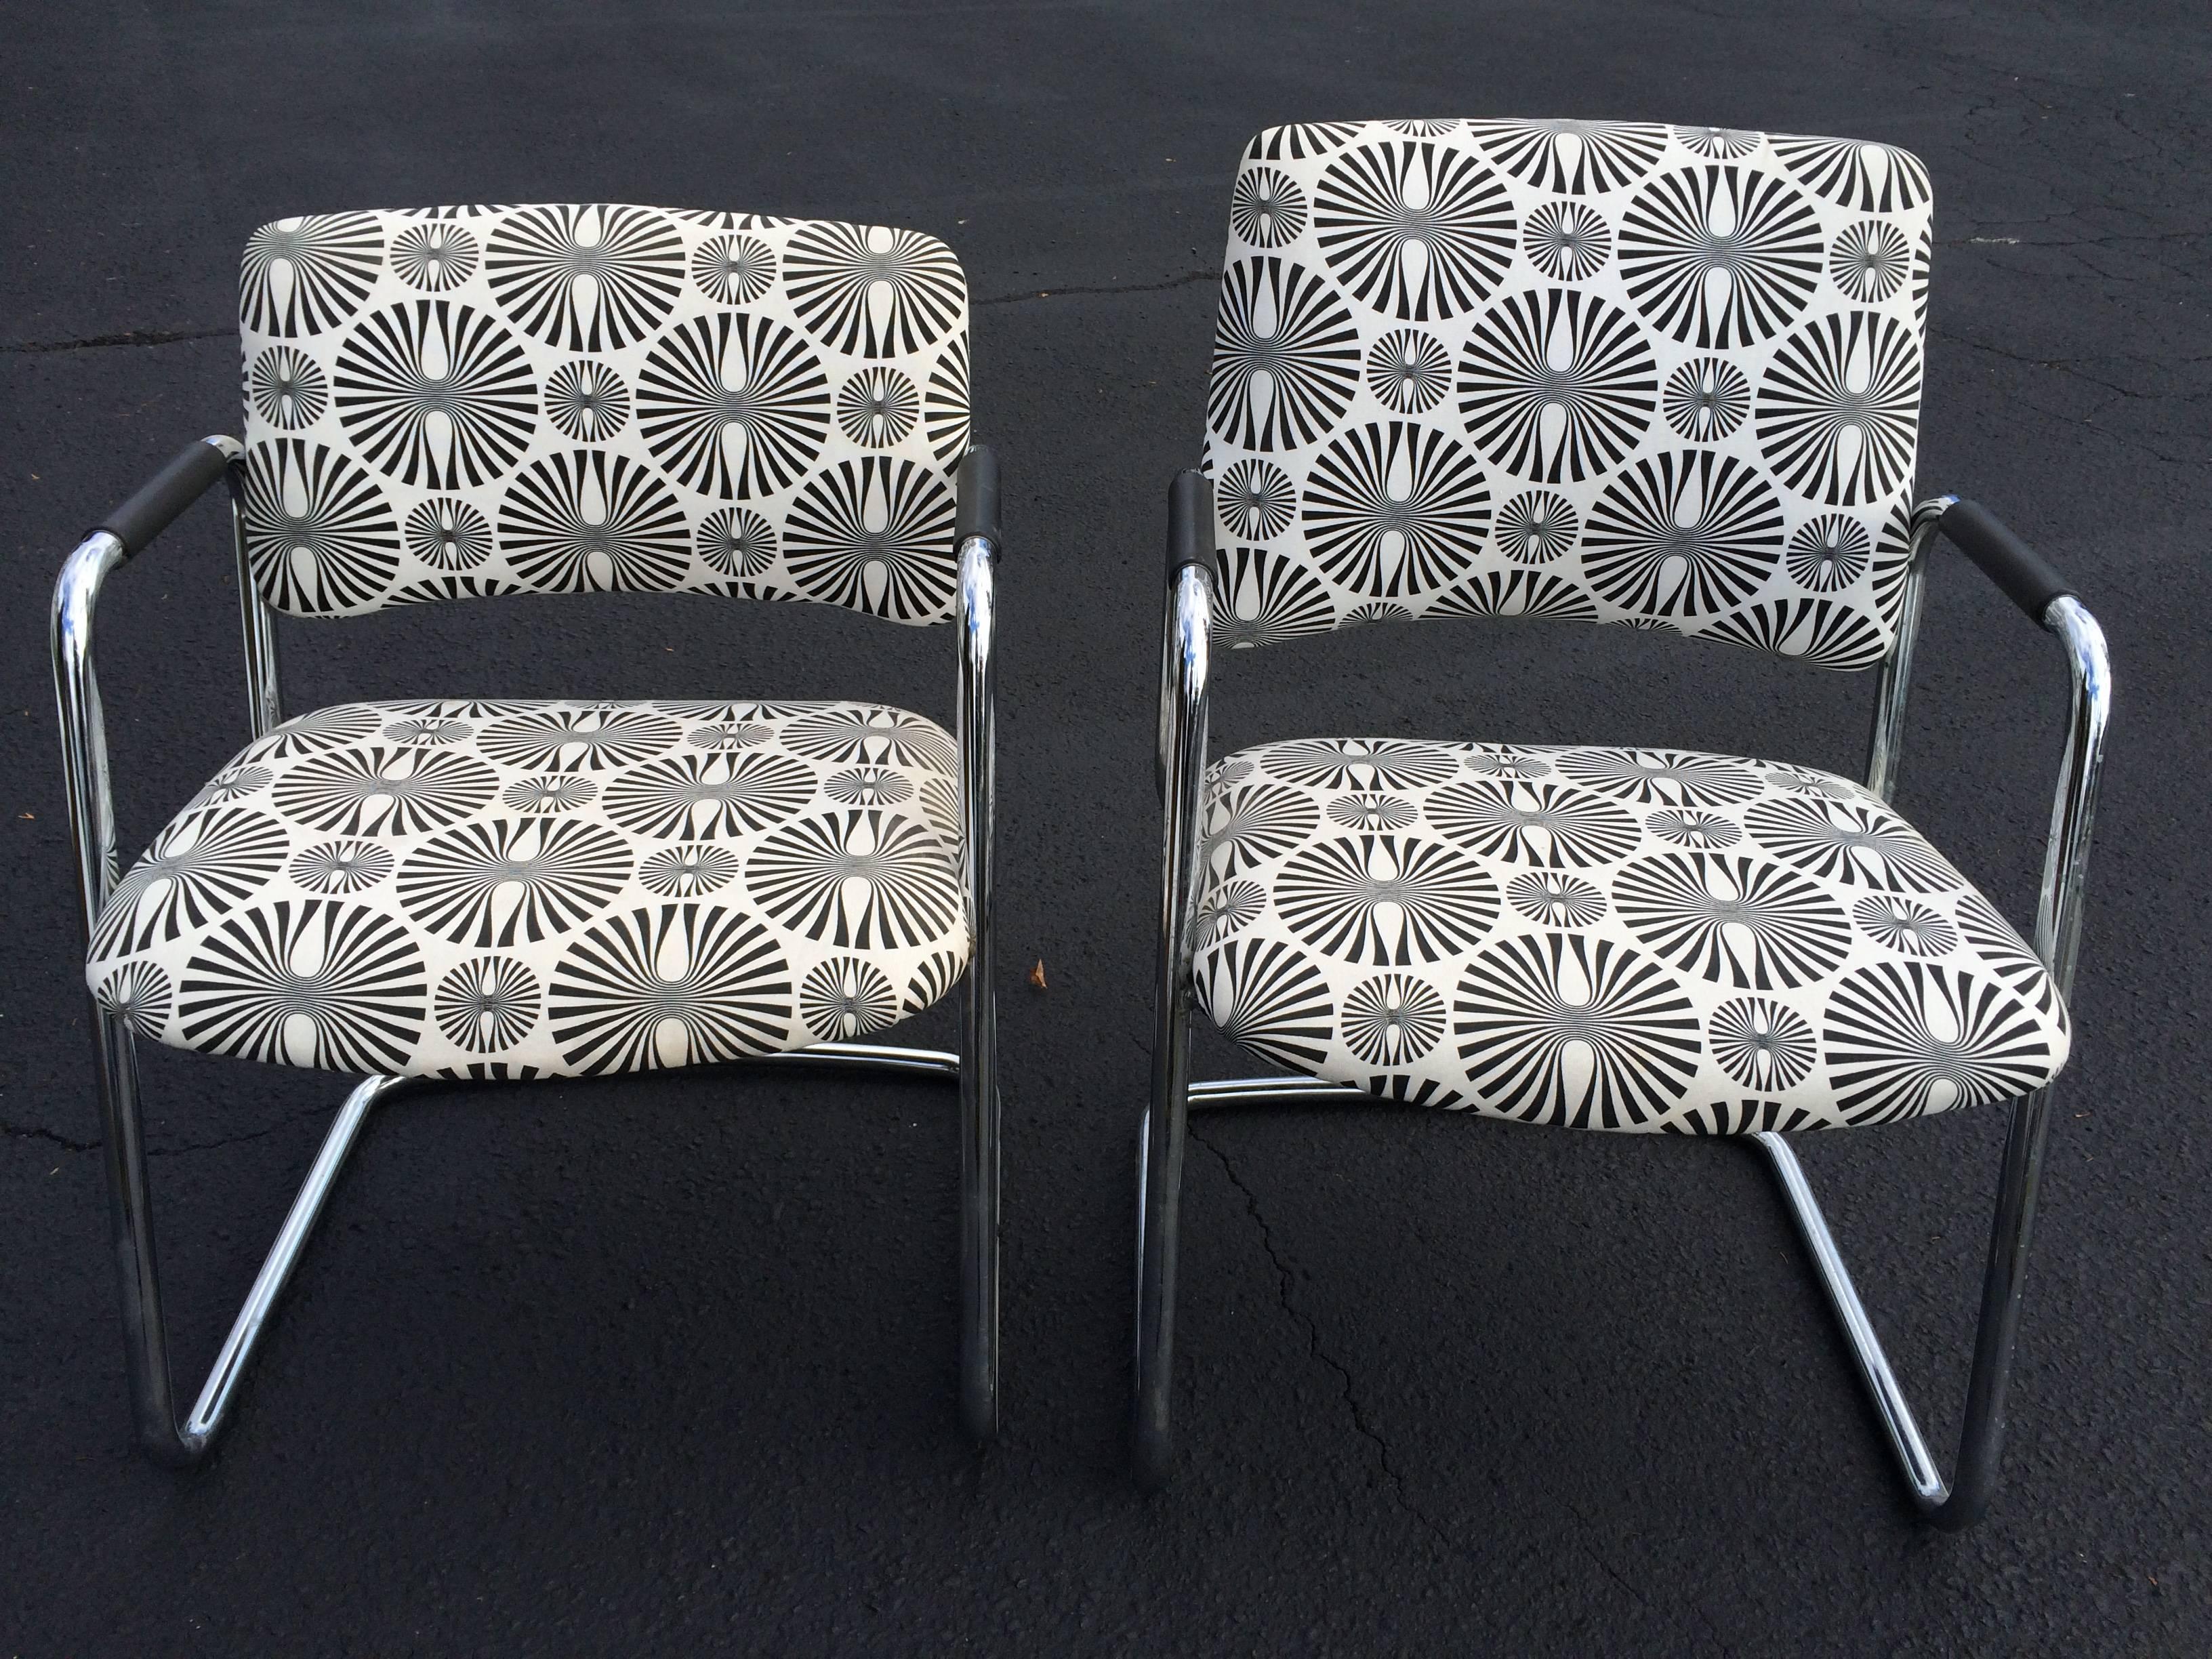 Pair of Mid-Century style optical art chairs in black and white. The chairs are covered in a cotton fabric with a psychedelic print. One chair has a high back and one a lower. These were used in an office with the high back chair behind the desk and